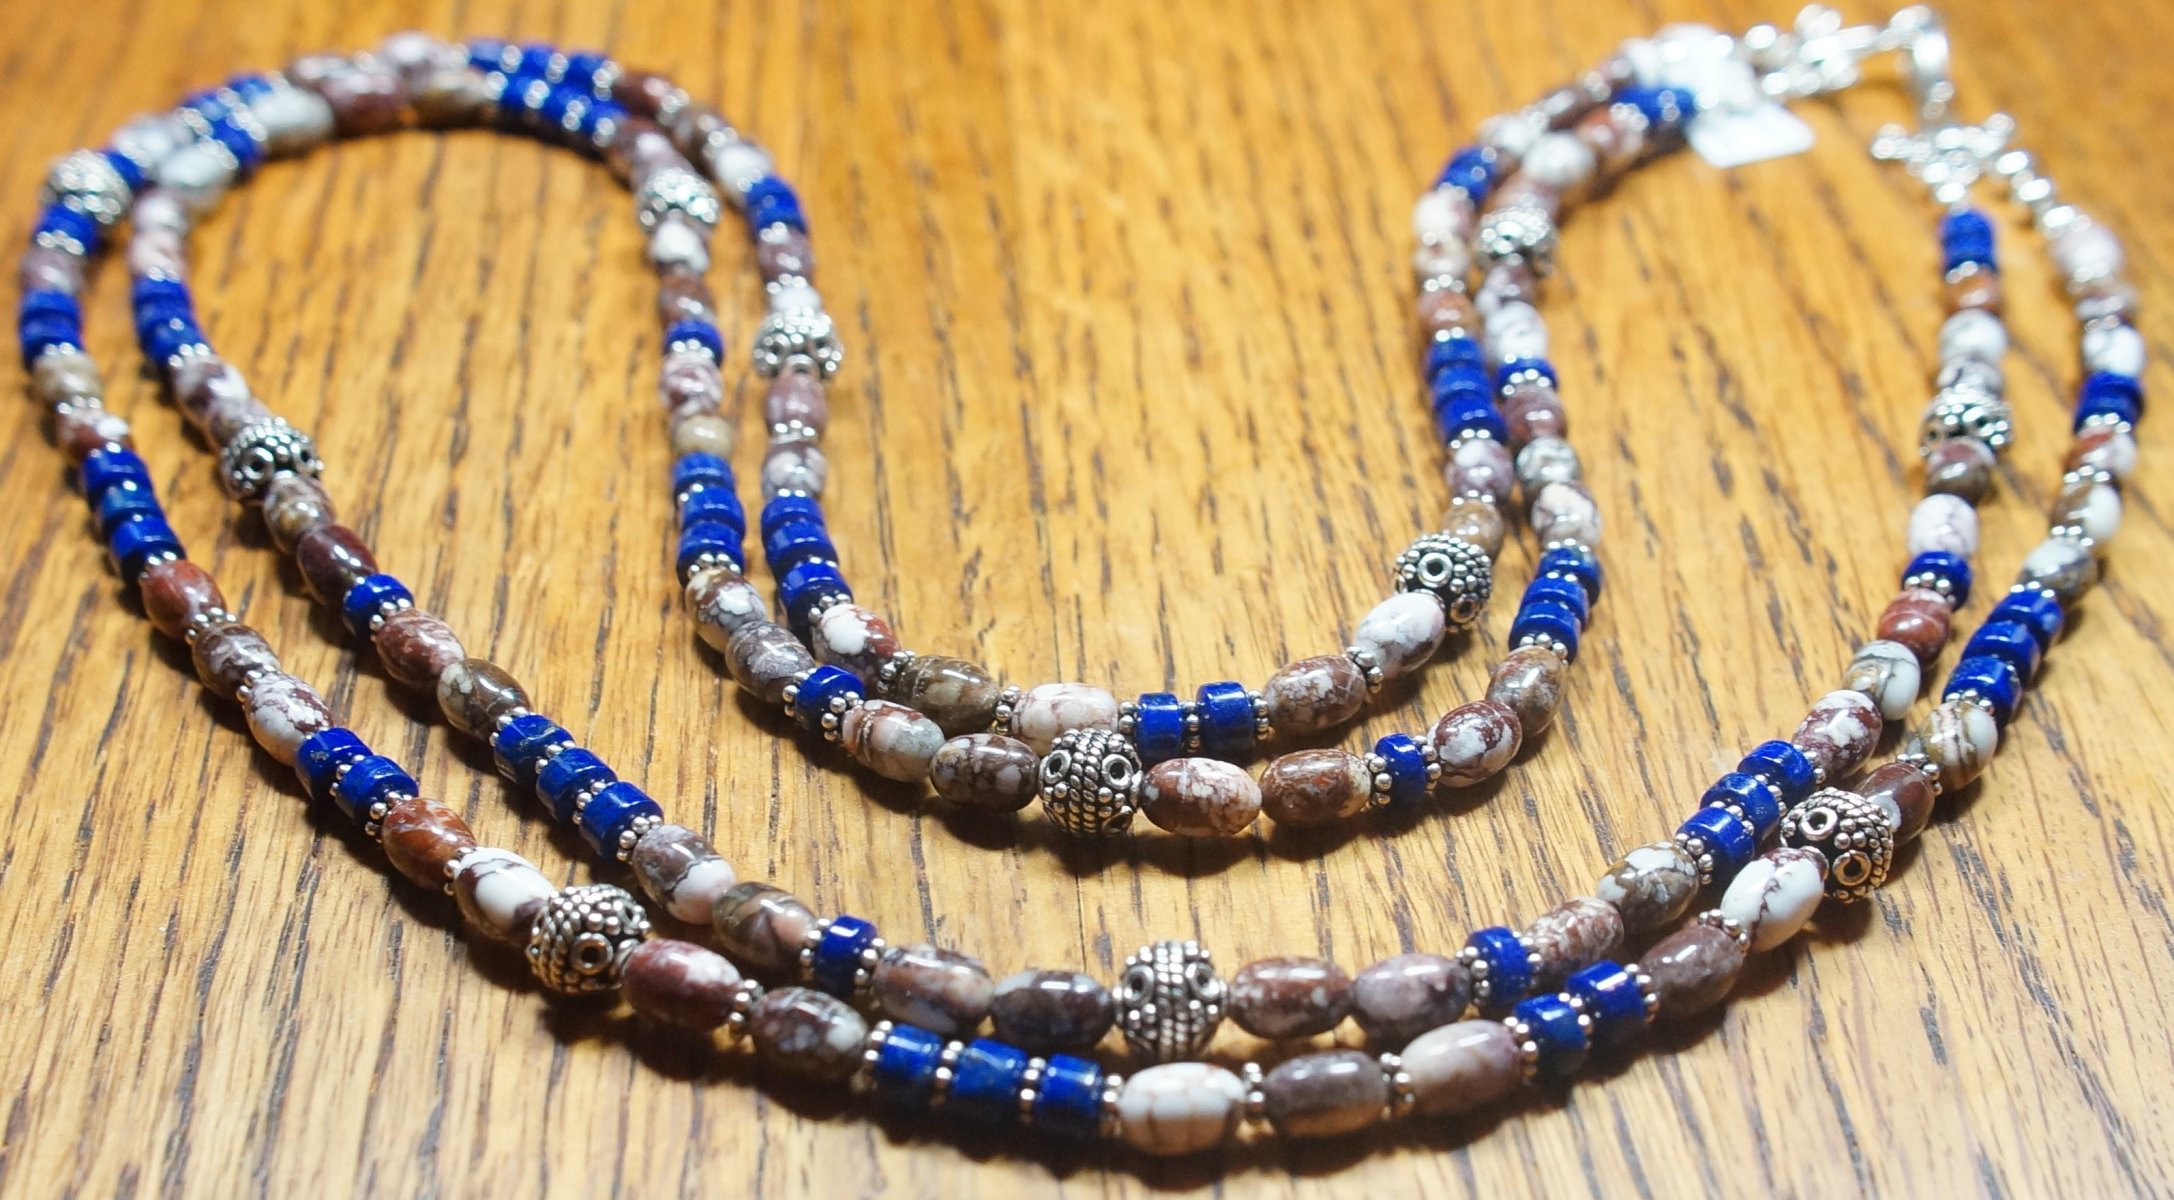 Scaled image Lapis and Wild Horse.JPG: Item #20151214b. $295. Wild Horse Oval Barrels, Lapis Rondells, Sterling Silver Bali Beads, Findings and Clasp. Double Strand Necklace. 26/27 inches long.� 